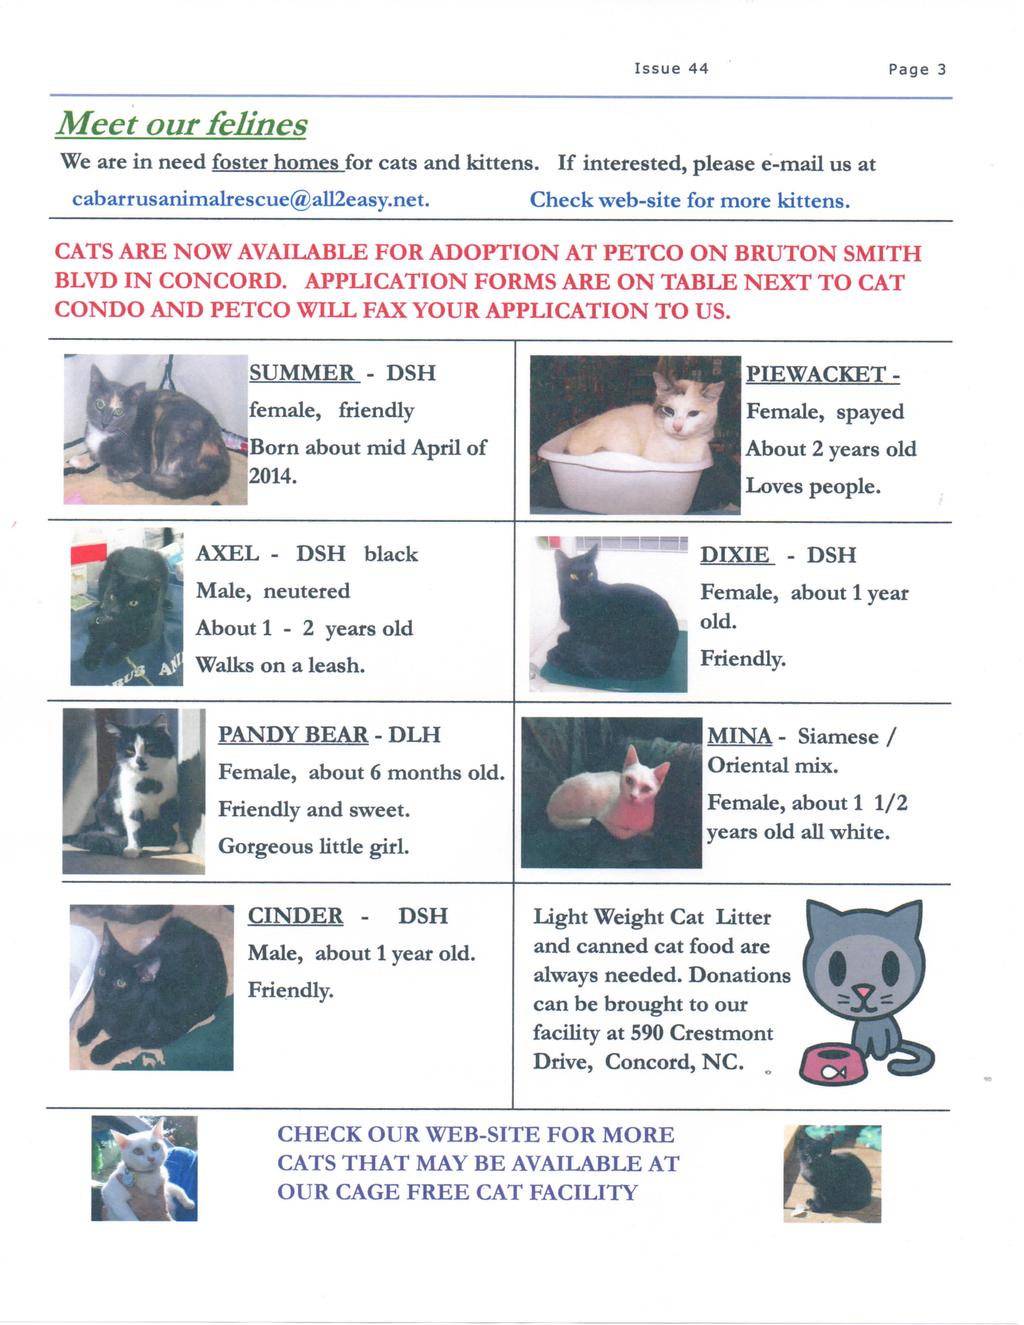 Meet our felines Issue 44 Page 3 We are in need foster homes for cats and kittens. If interested, please e-mail us at cabarrusanimalrescue@all2easy.net. Check web-site for more kittens.